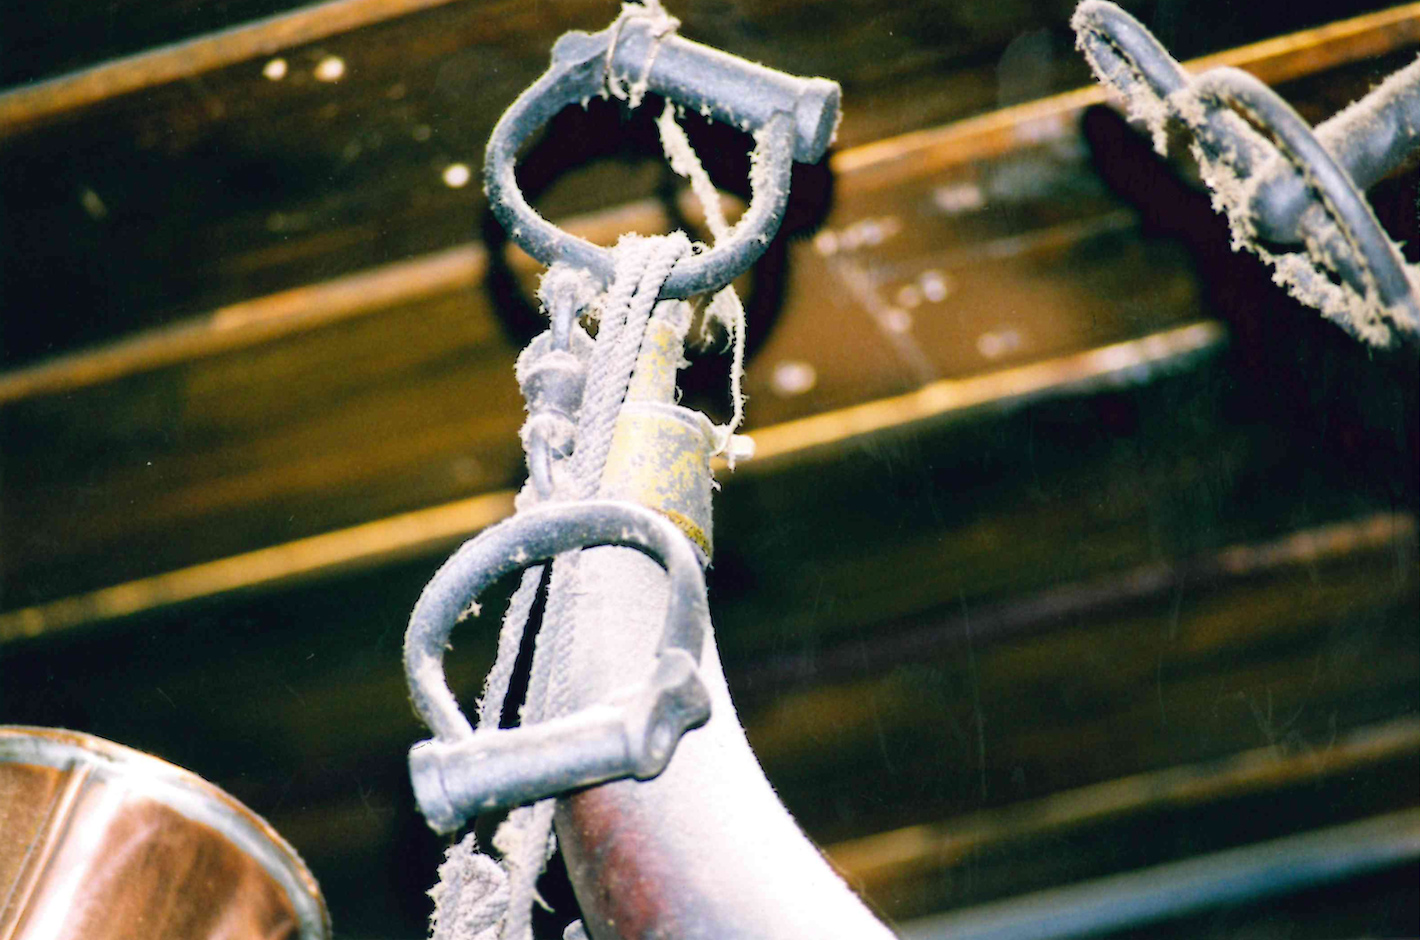 Harry Houdini's handcuffs, hanging from the McSorley's ceiling.